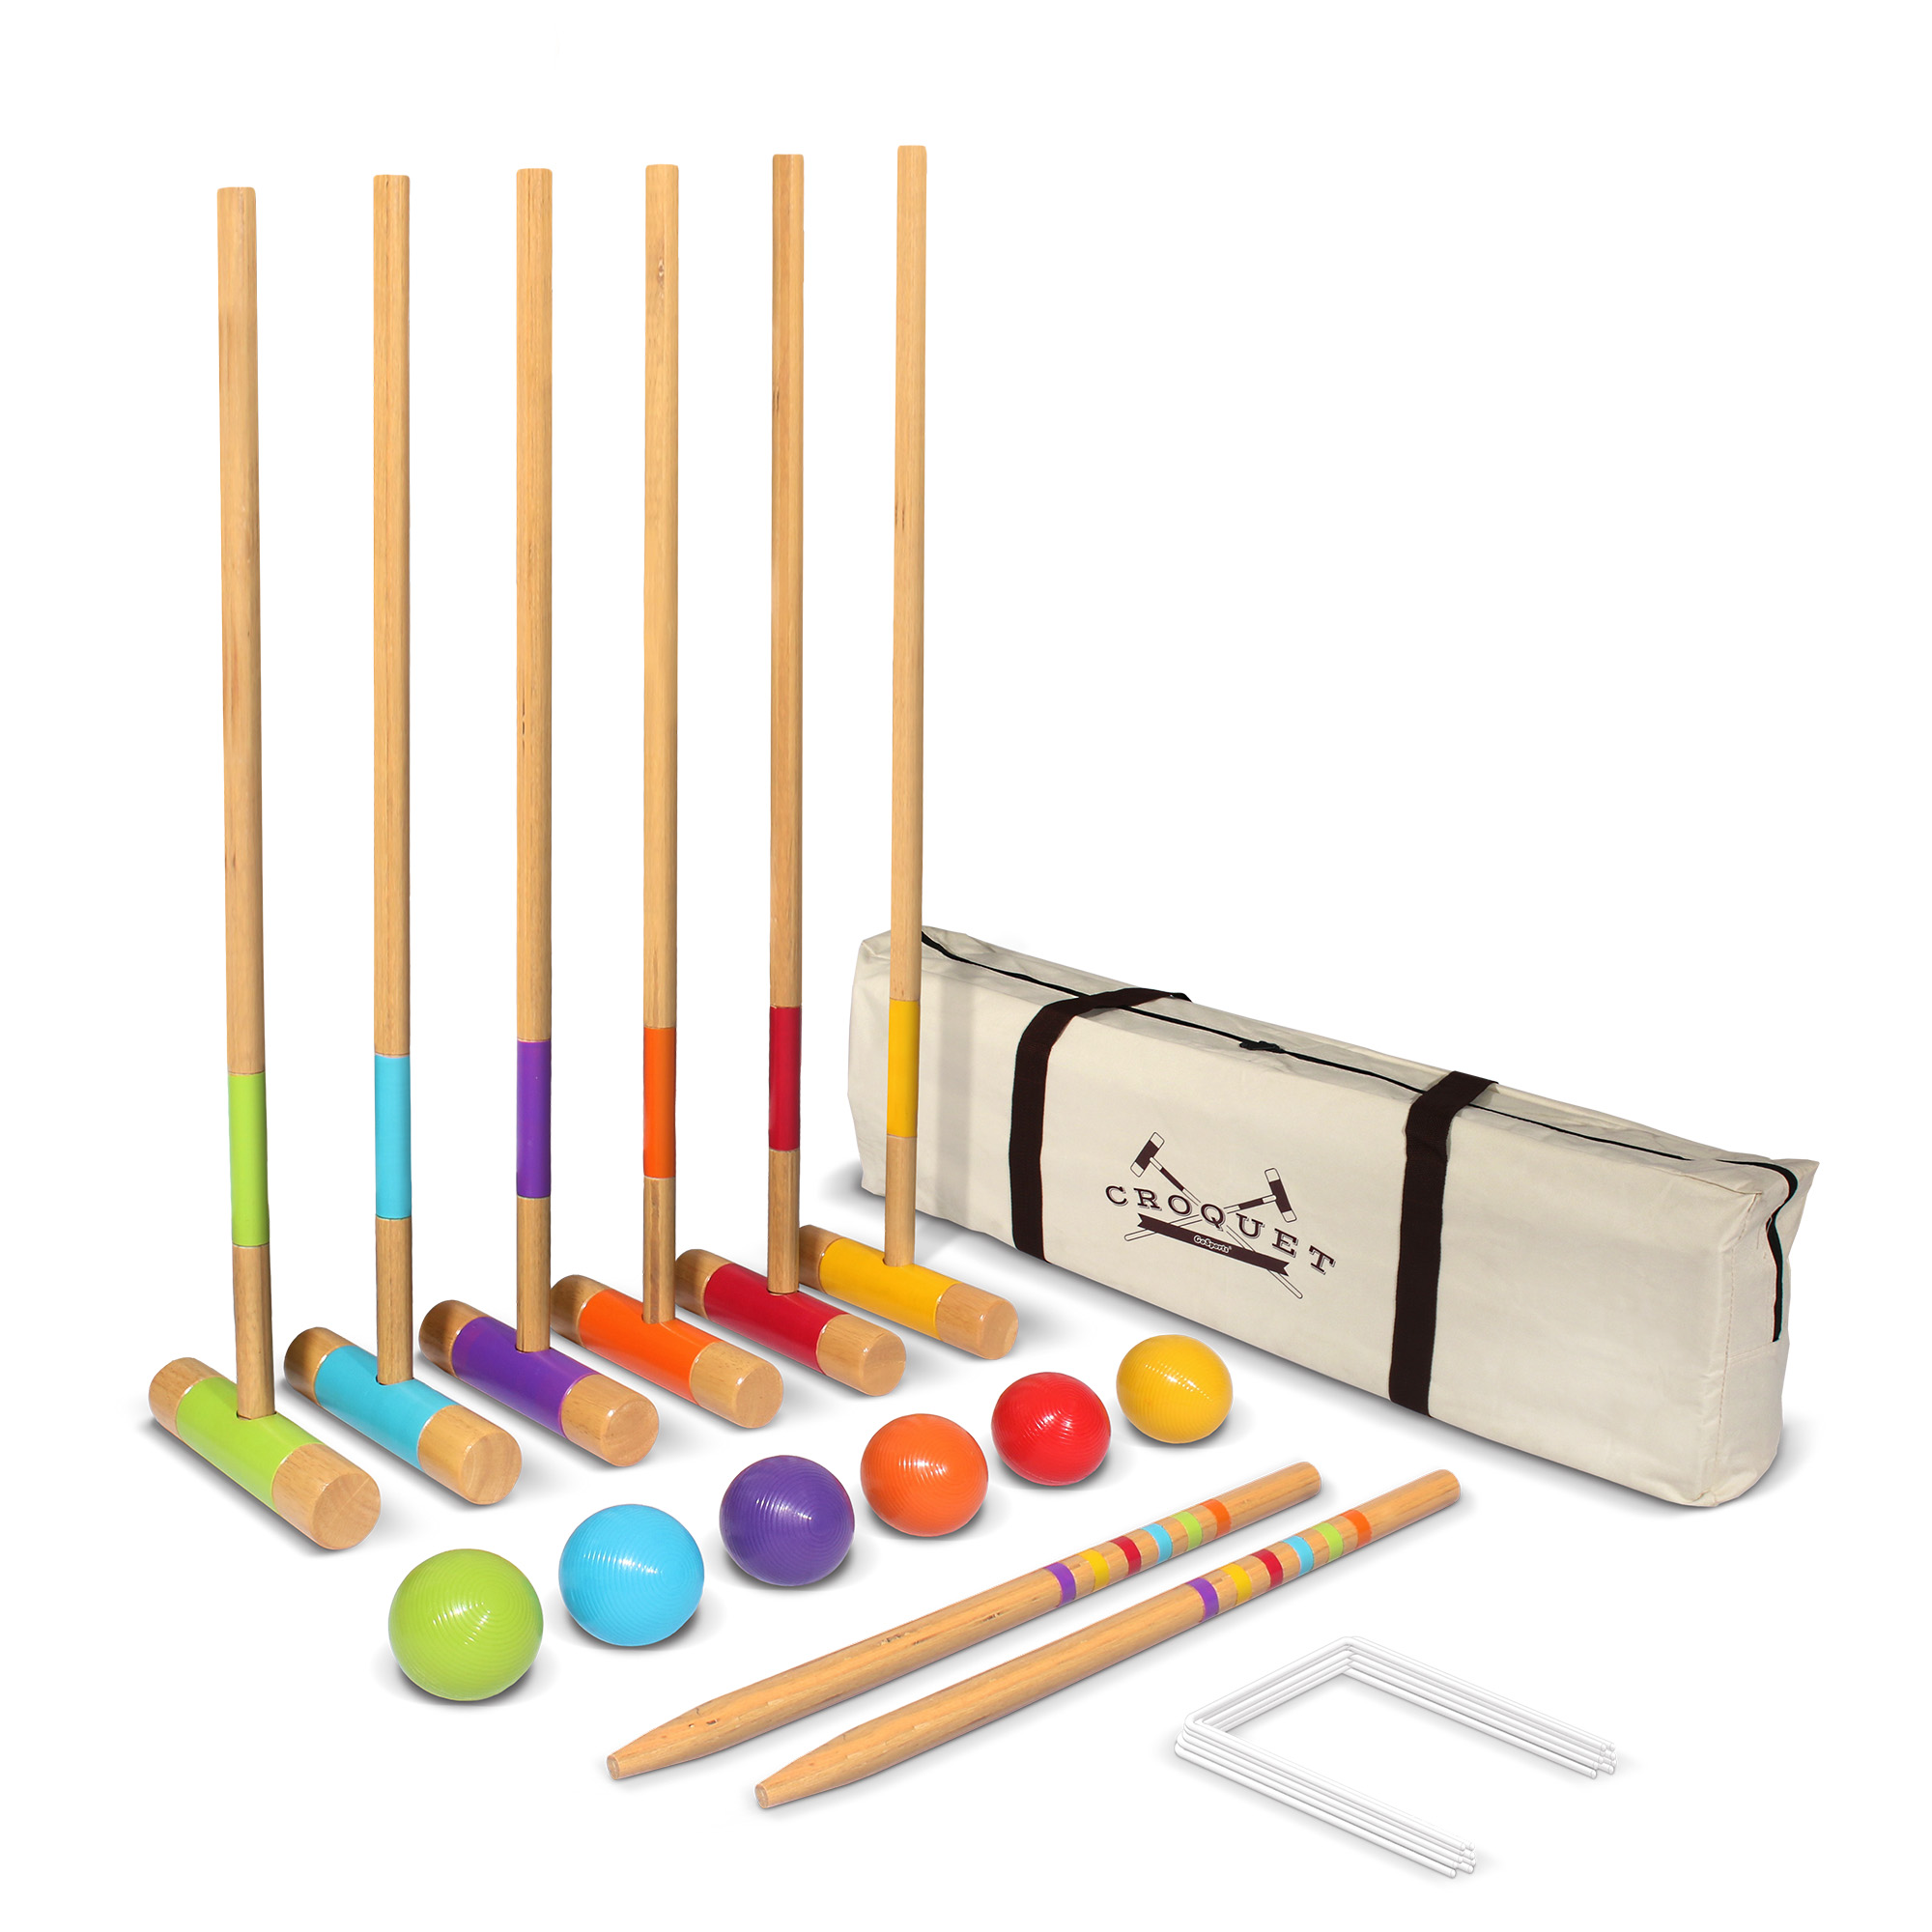 GoSports Standard Backyard Outdoor 6 Person Lawn Kid and Adult Croquet Game Set - image 1 of 5